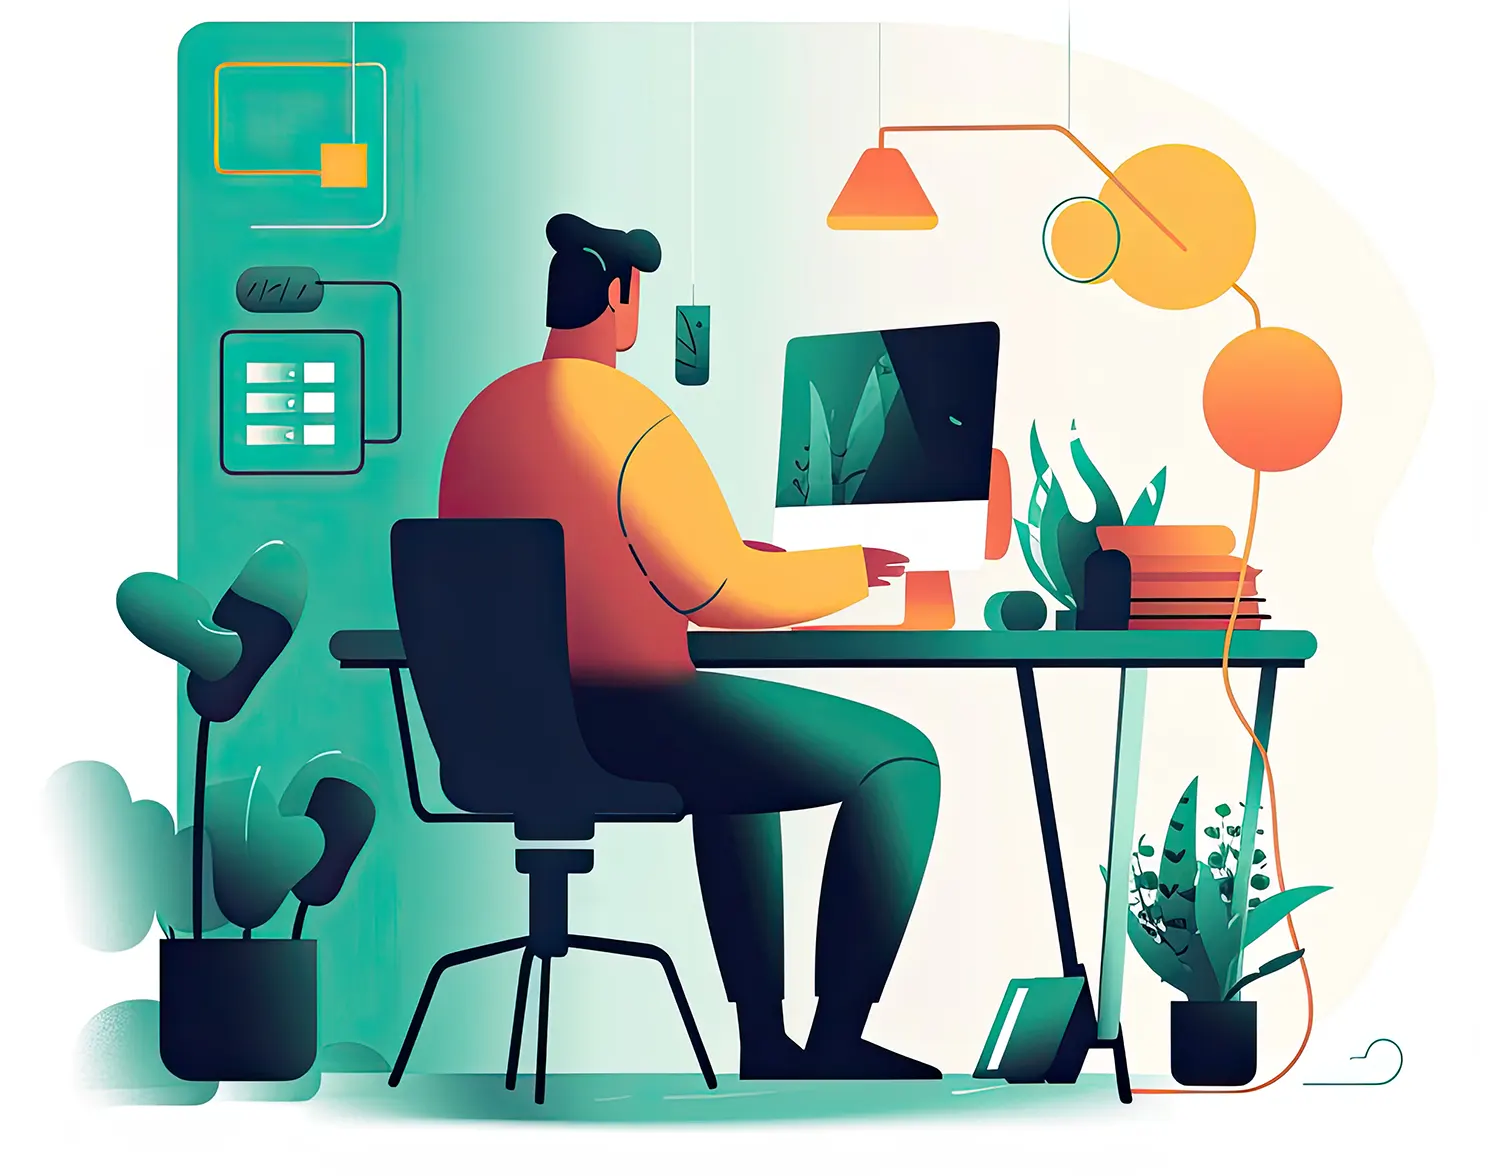 A stylized illustration of a man sitting at his desk in front of a computer in a colorfully lit room.